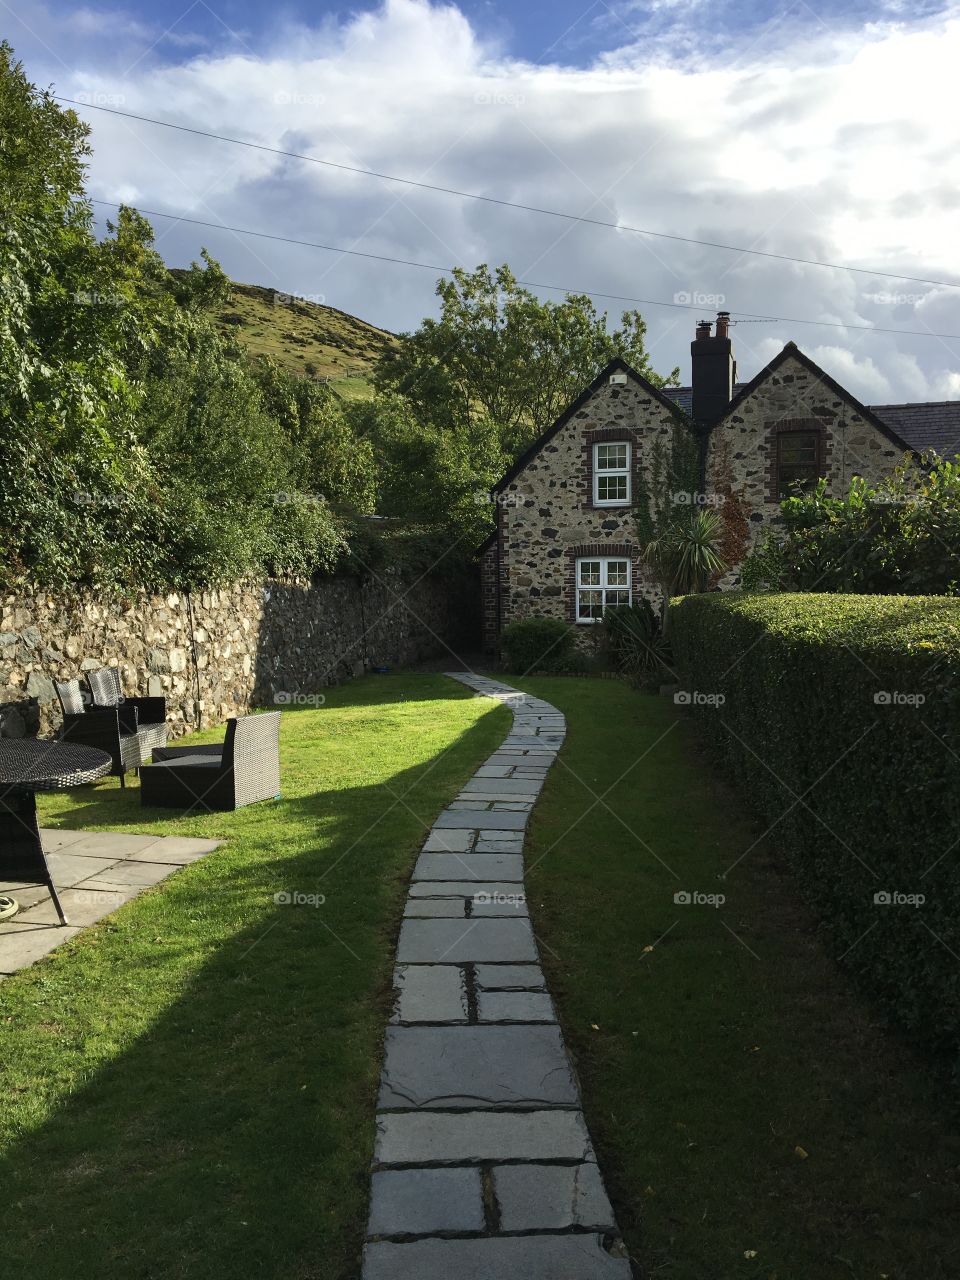 Beautiful little stone cottage right up in the Welsh hills. So peaceful, perfect for some R&R.